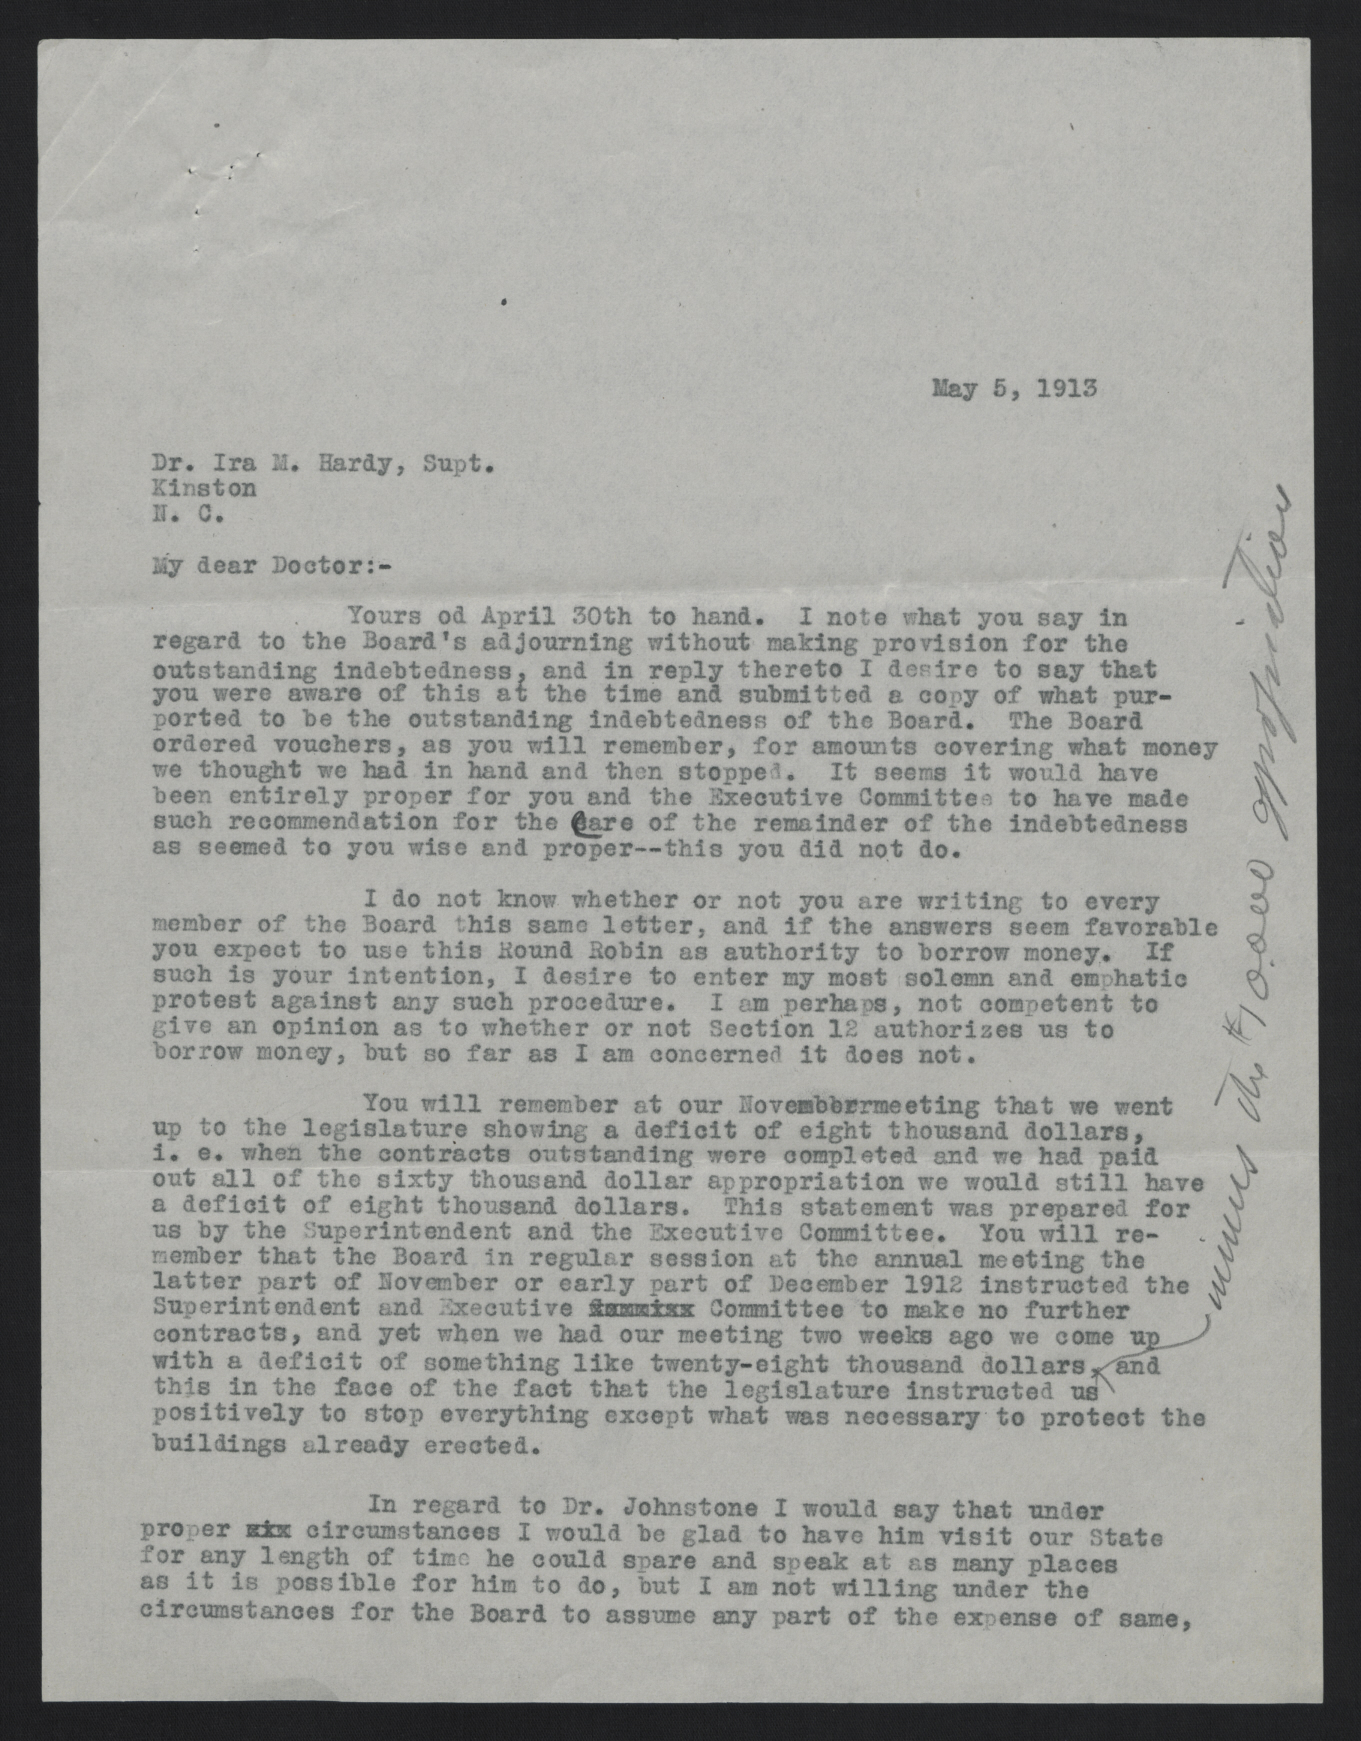 Letter from Hardy to McBrayer, May 5, 1913, page 1